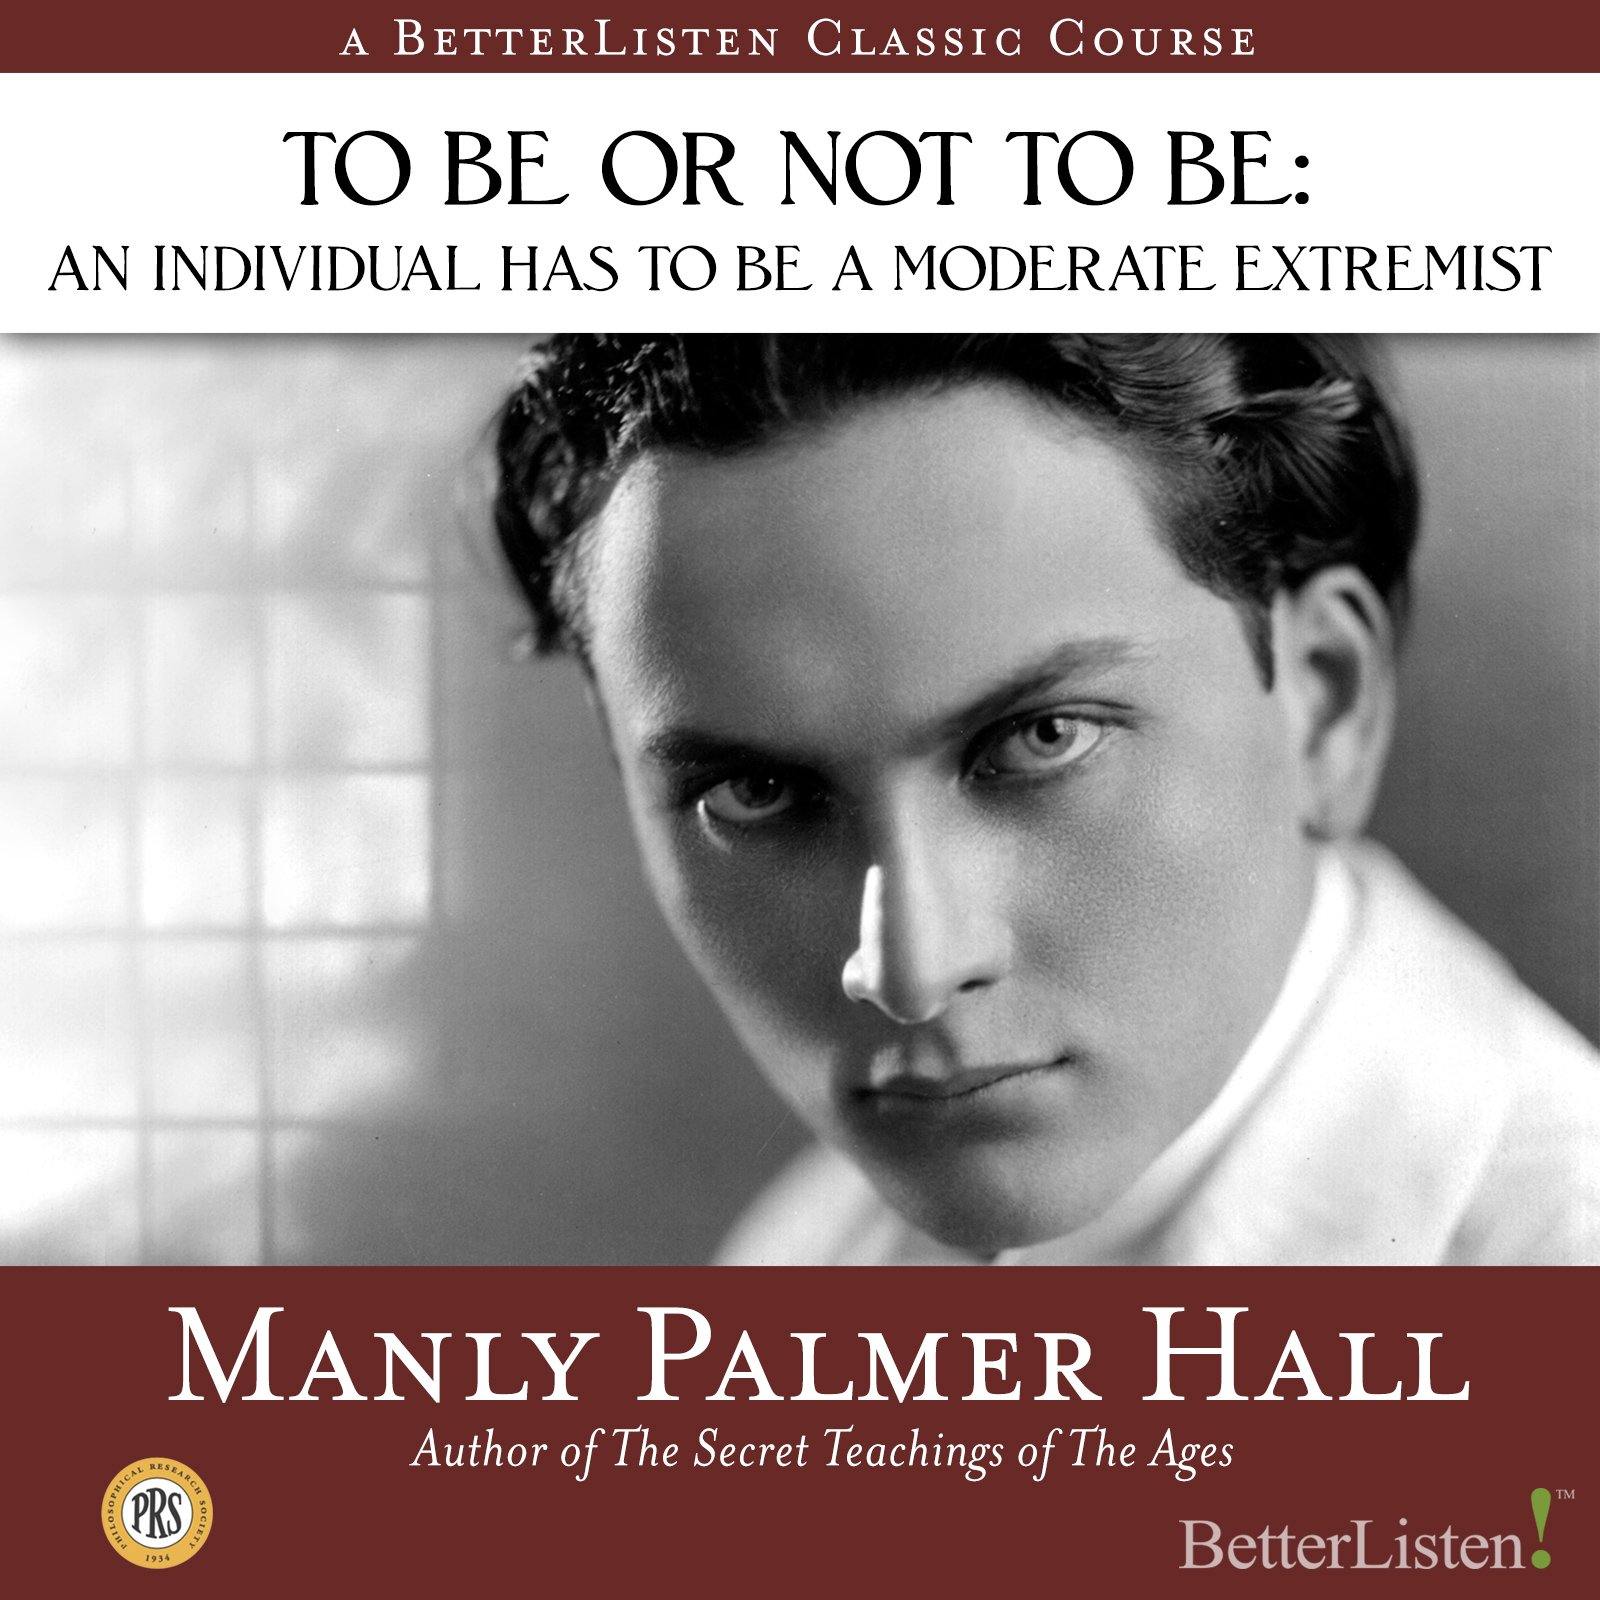 To Be or Not to Be: An Individual Has to be a Moderate Extremist with Manly P. Hall Audio Program Philosophical Research Society - BetterListen!